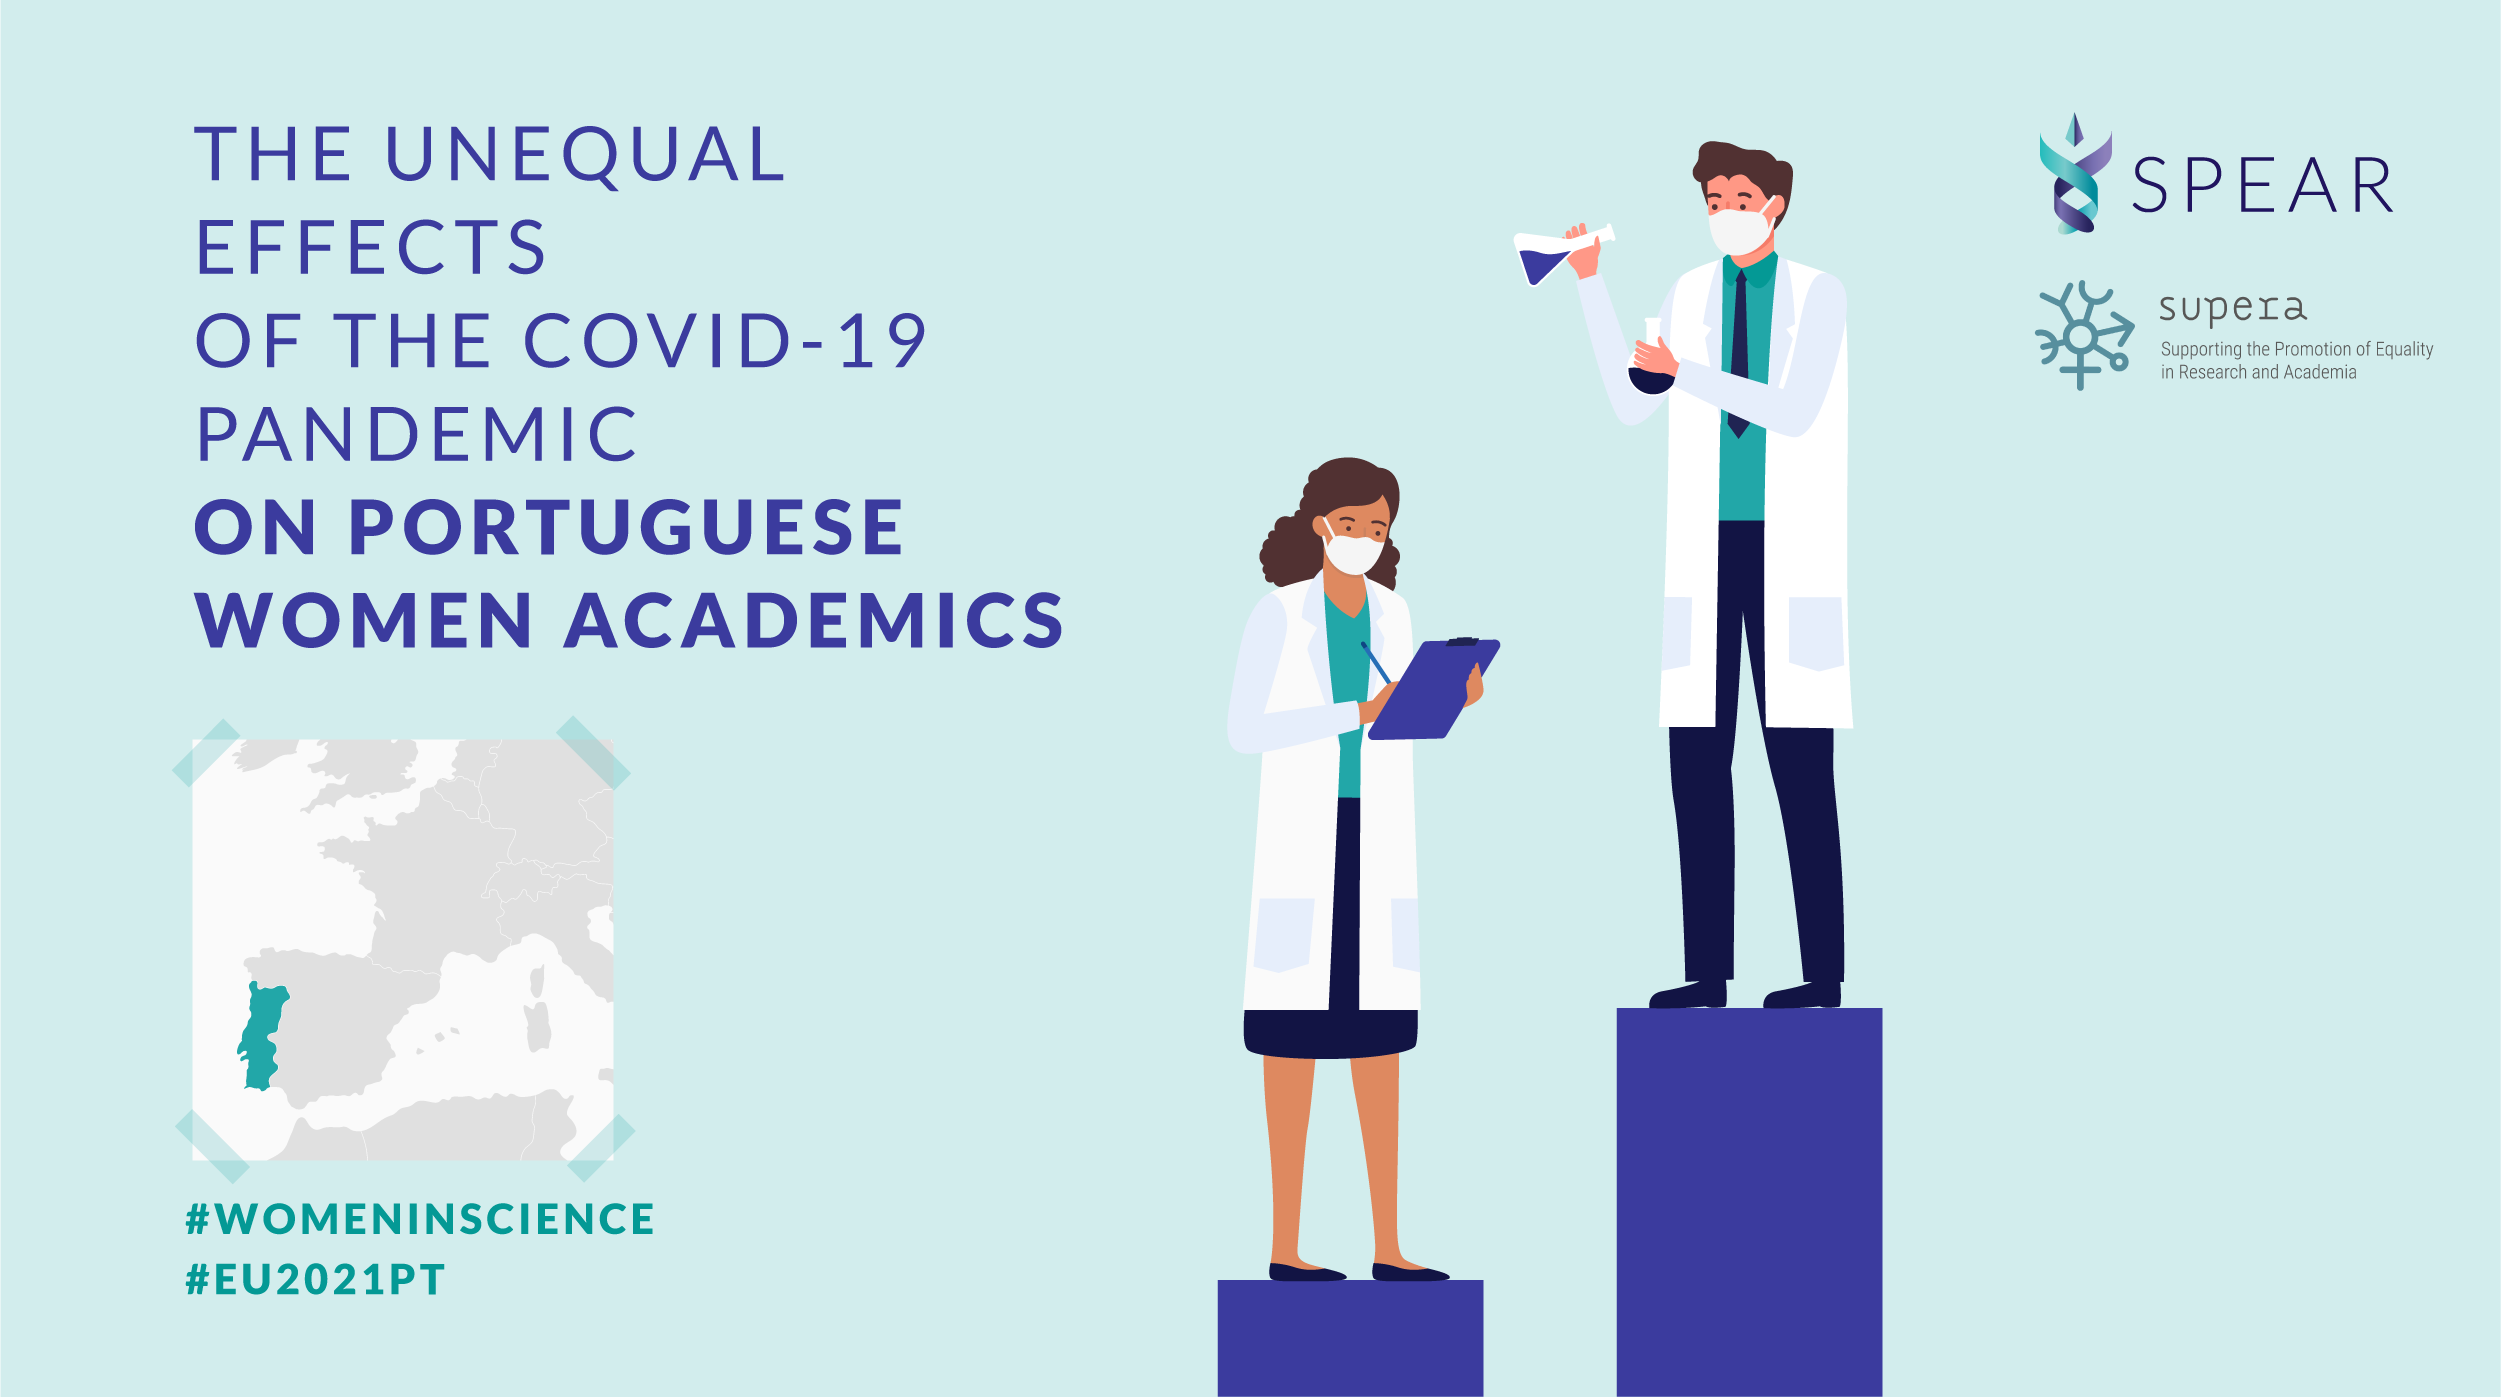 THE UNEQUAL EFFECTS OF THE COVID-19 PANDEMIC ON PORTUGUESE WOMEN ACADEMICS